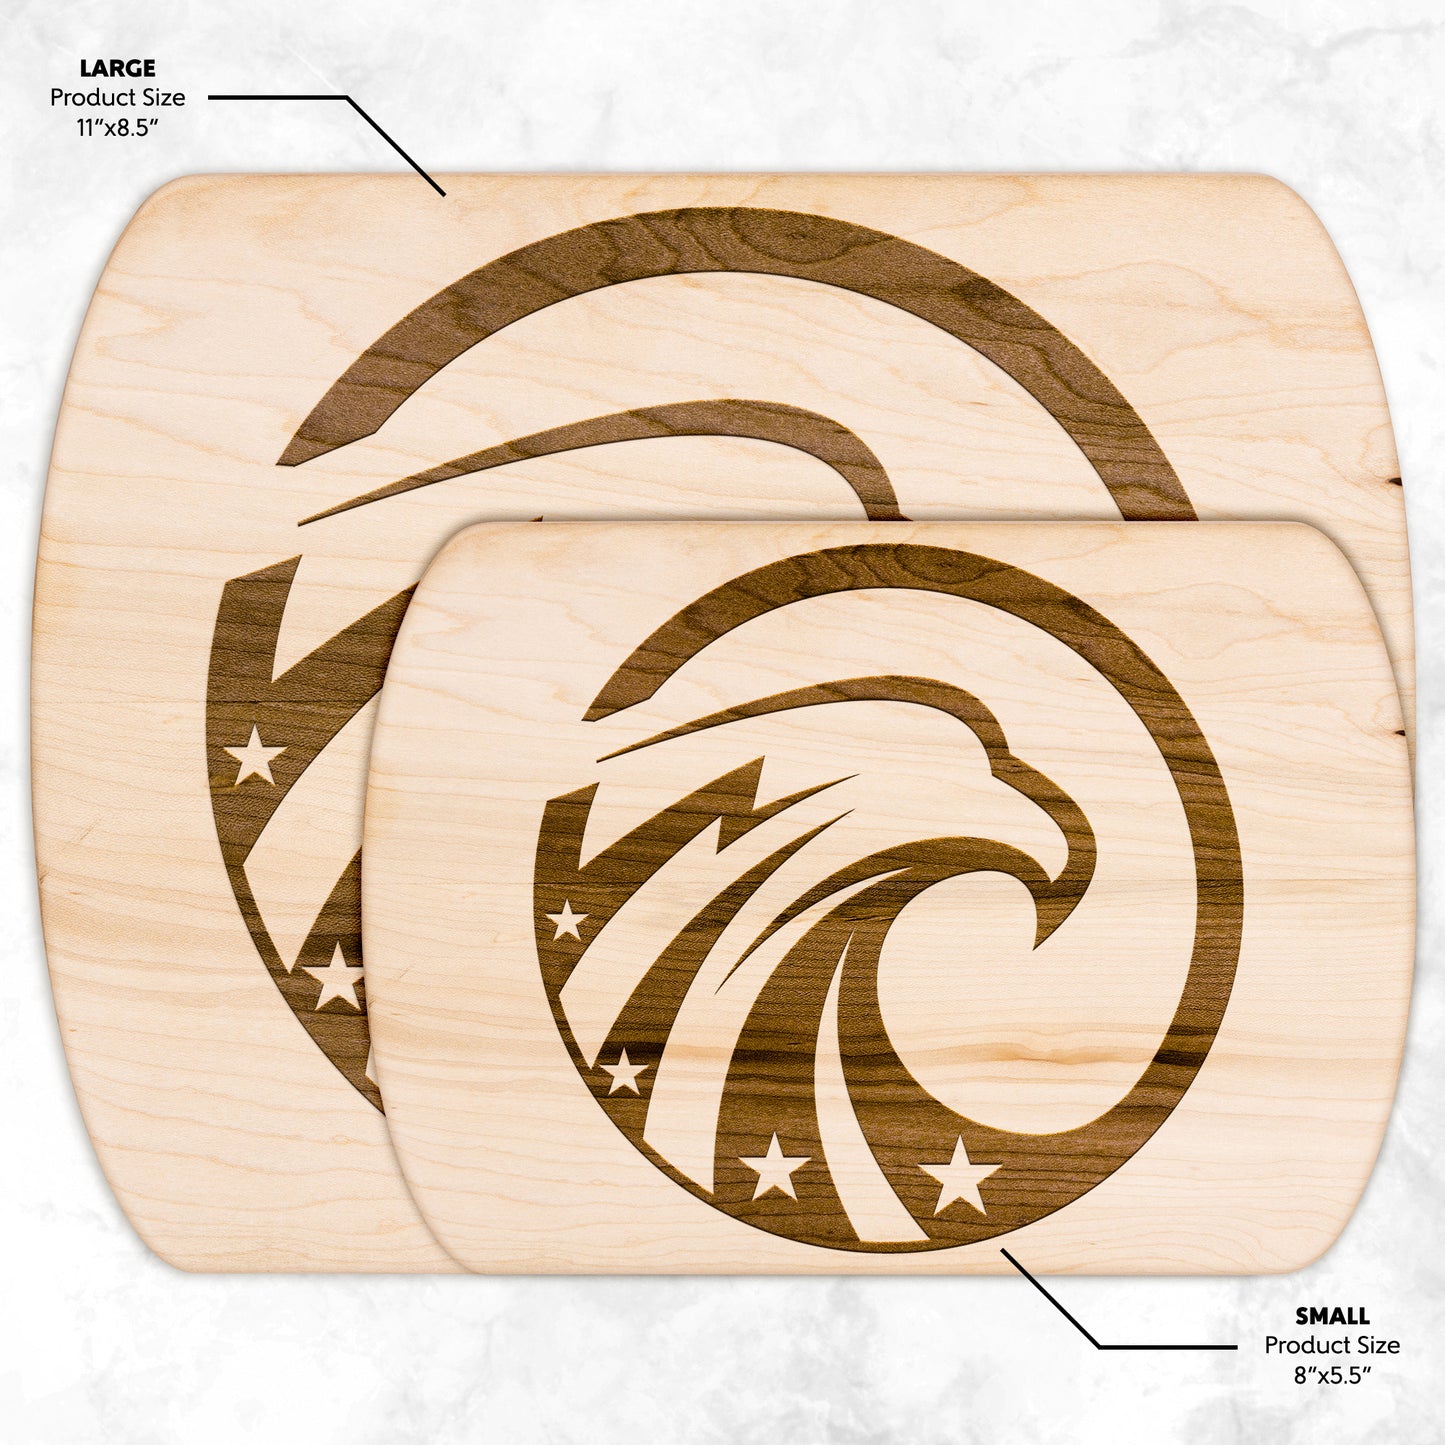 USA Eagle with Stars Hardwood Oval Cutting Boards in Maple or Walnut